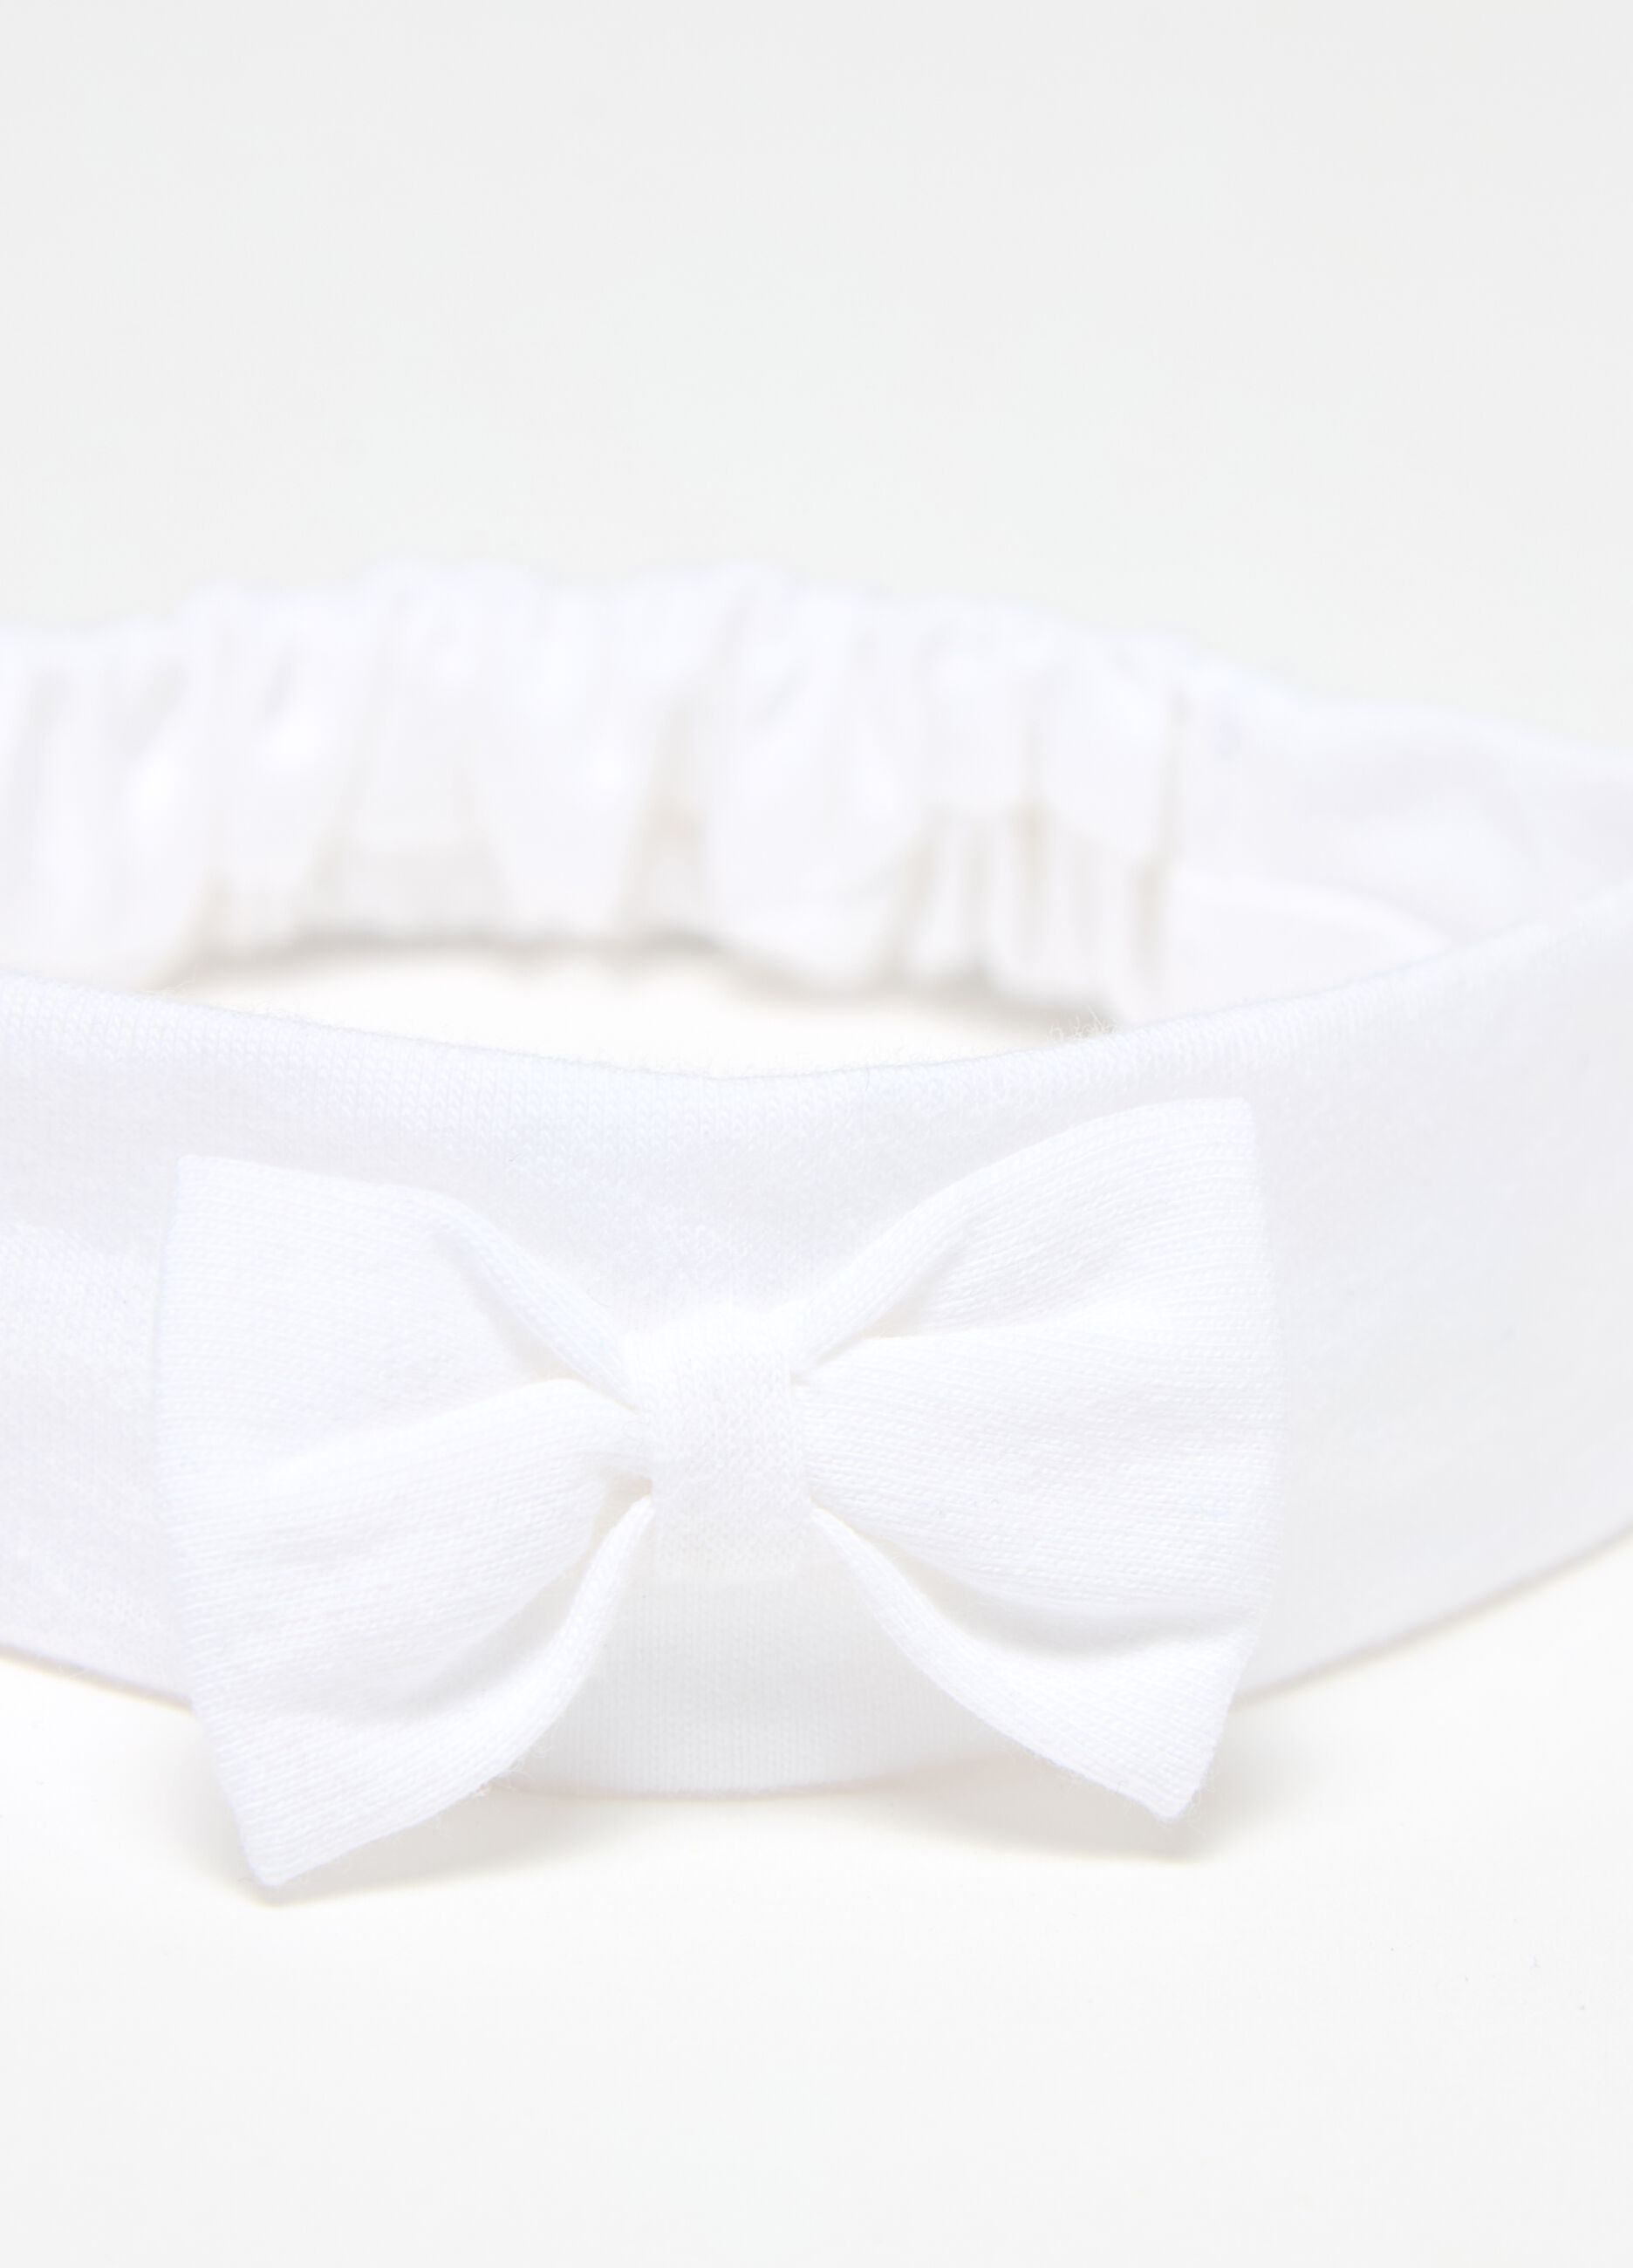 Hair band with bow